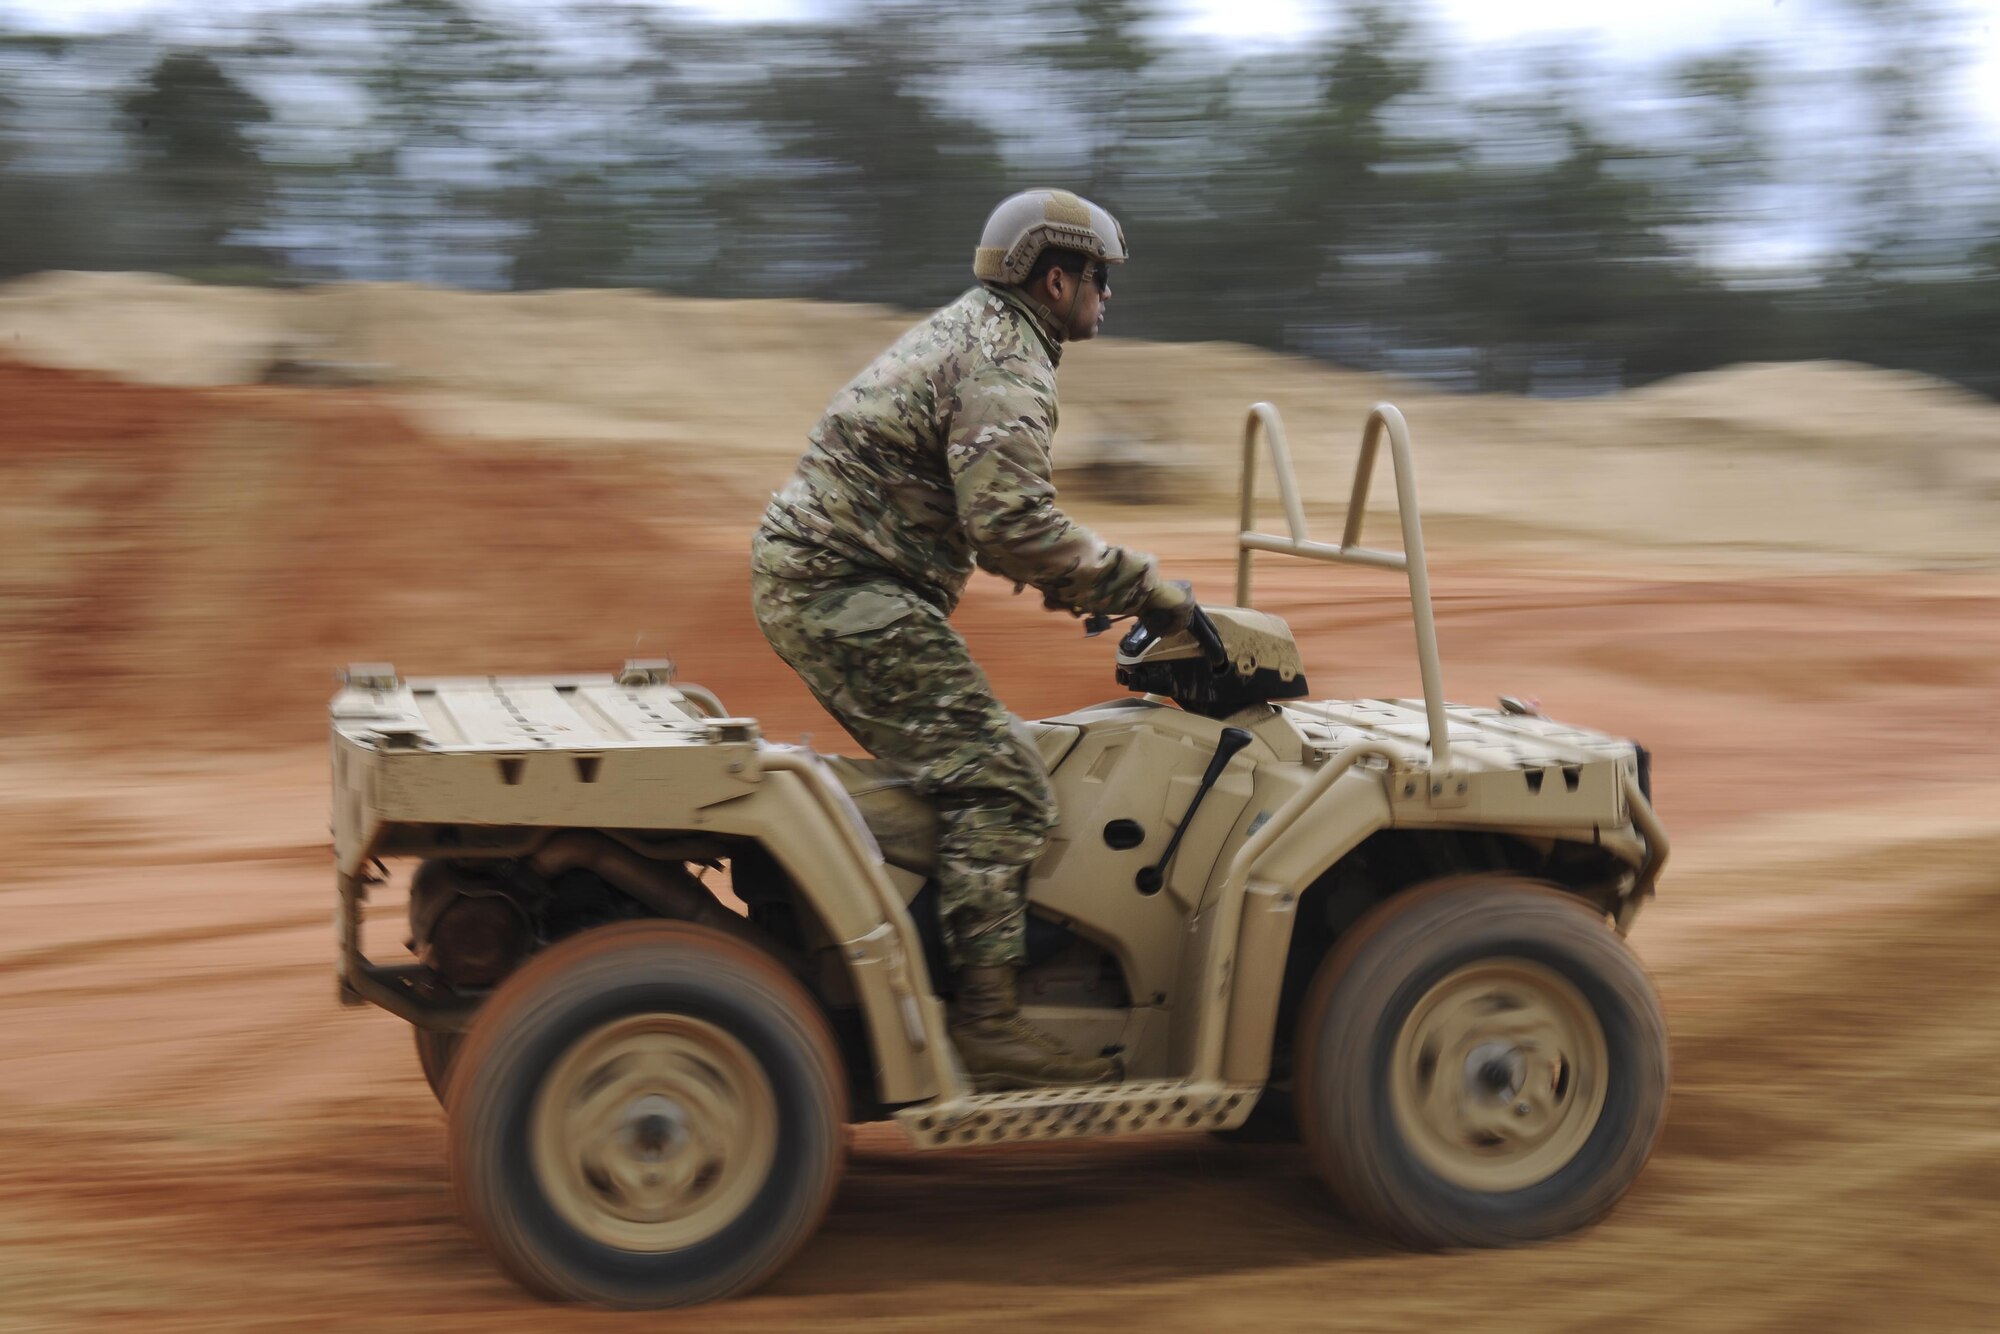 A Soldier with the 1st Battalion, 10th Special Forces Group, rides an all-terrain vehicle at Buck Pond in Navarre, Fla., March 14, 2017. An instructor from the 1st Special Operations Support Squadron Operational Support Joint Office taught Soldiers ATV techniques such as weight placement during a turn, how to stop properly and how to safely climb a hill. (U.S. Air Force photo by Airman 1st Class Dennis Spain)